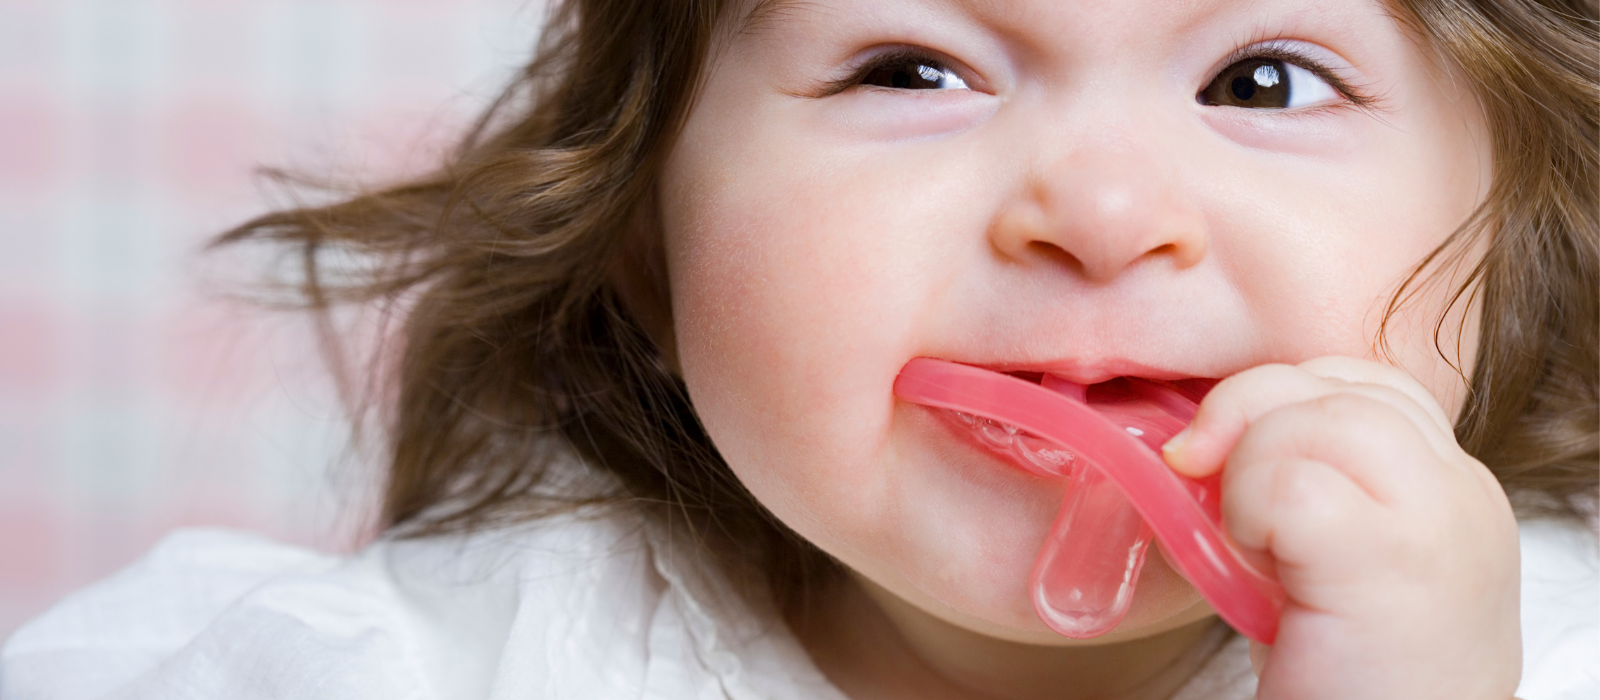 When and how to remove the pacifier